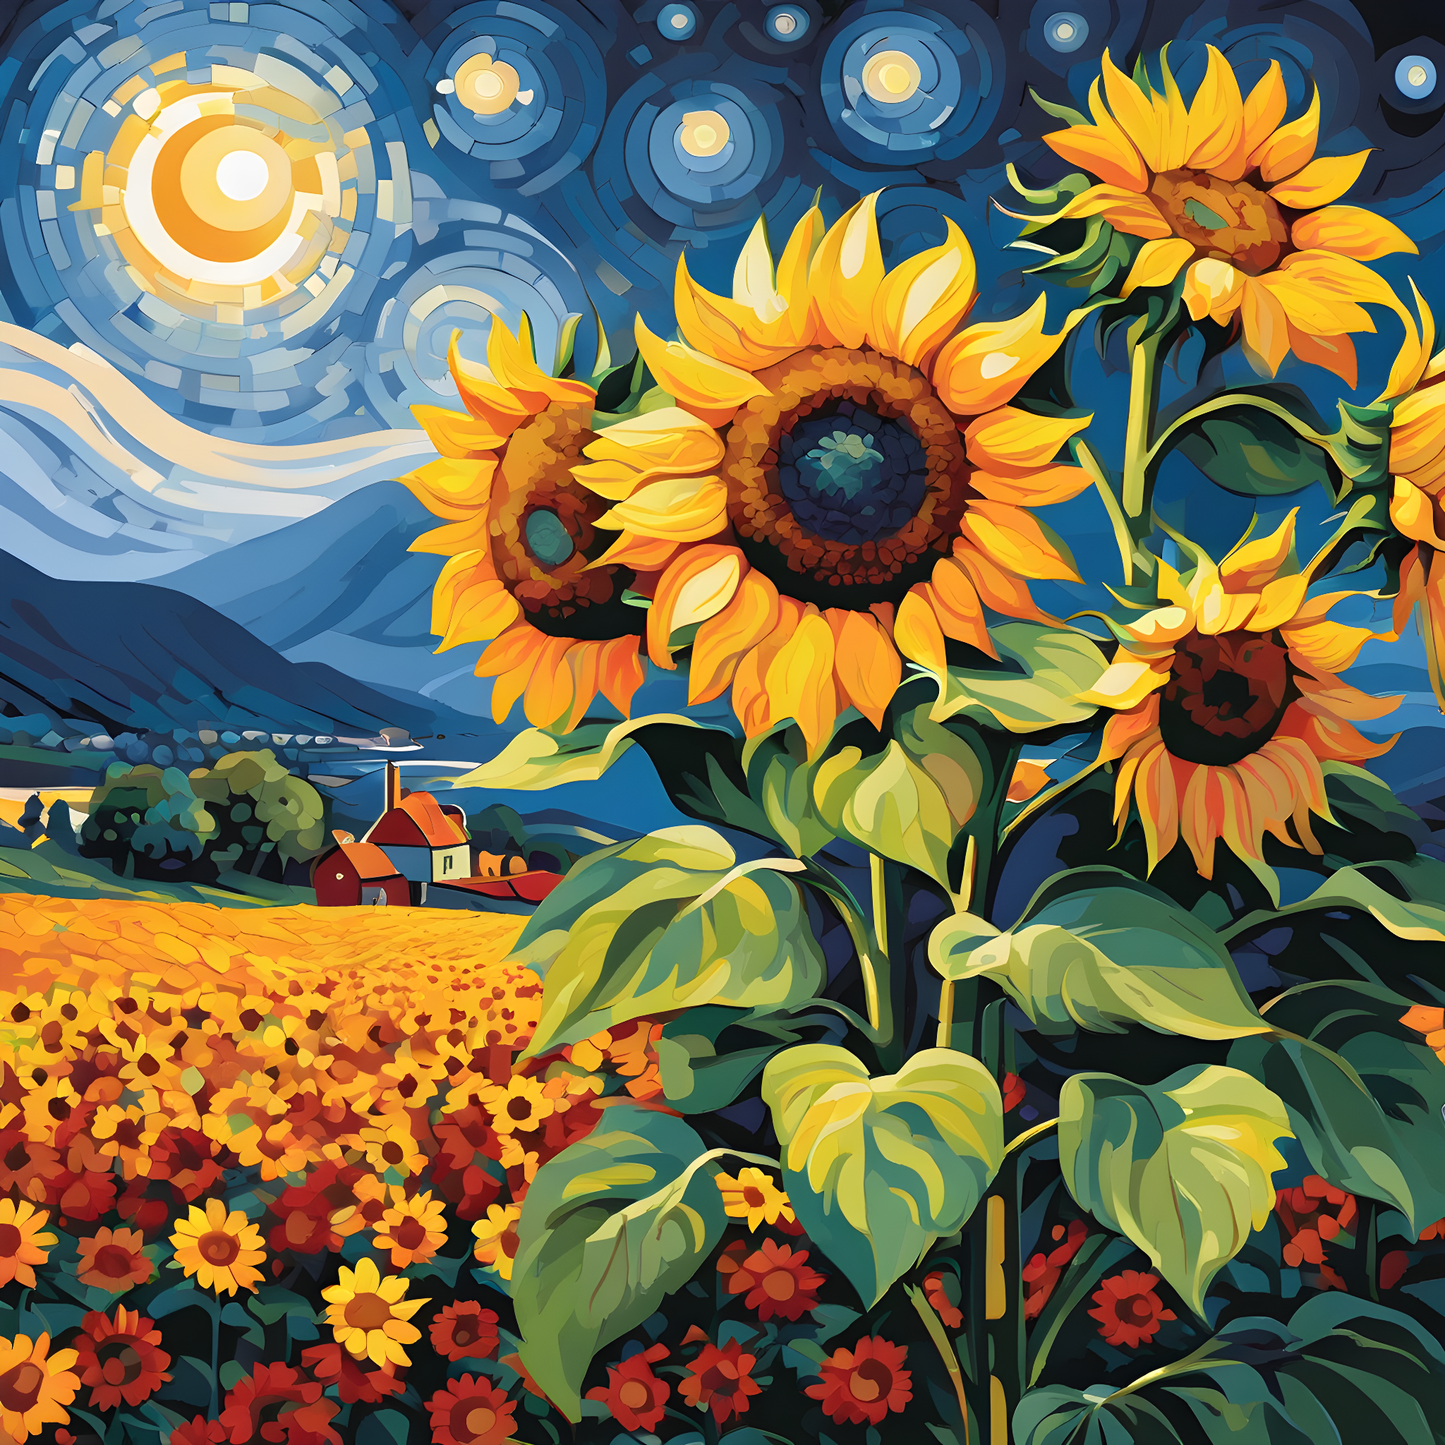 Starry Night Sunflowers PD (2) - Paint-By-Number Kit